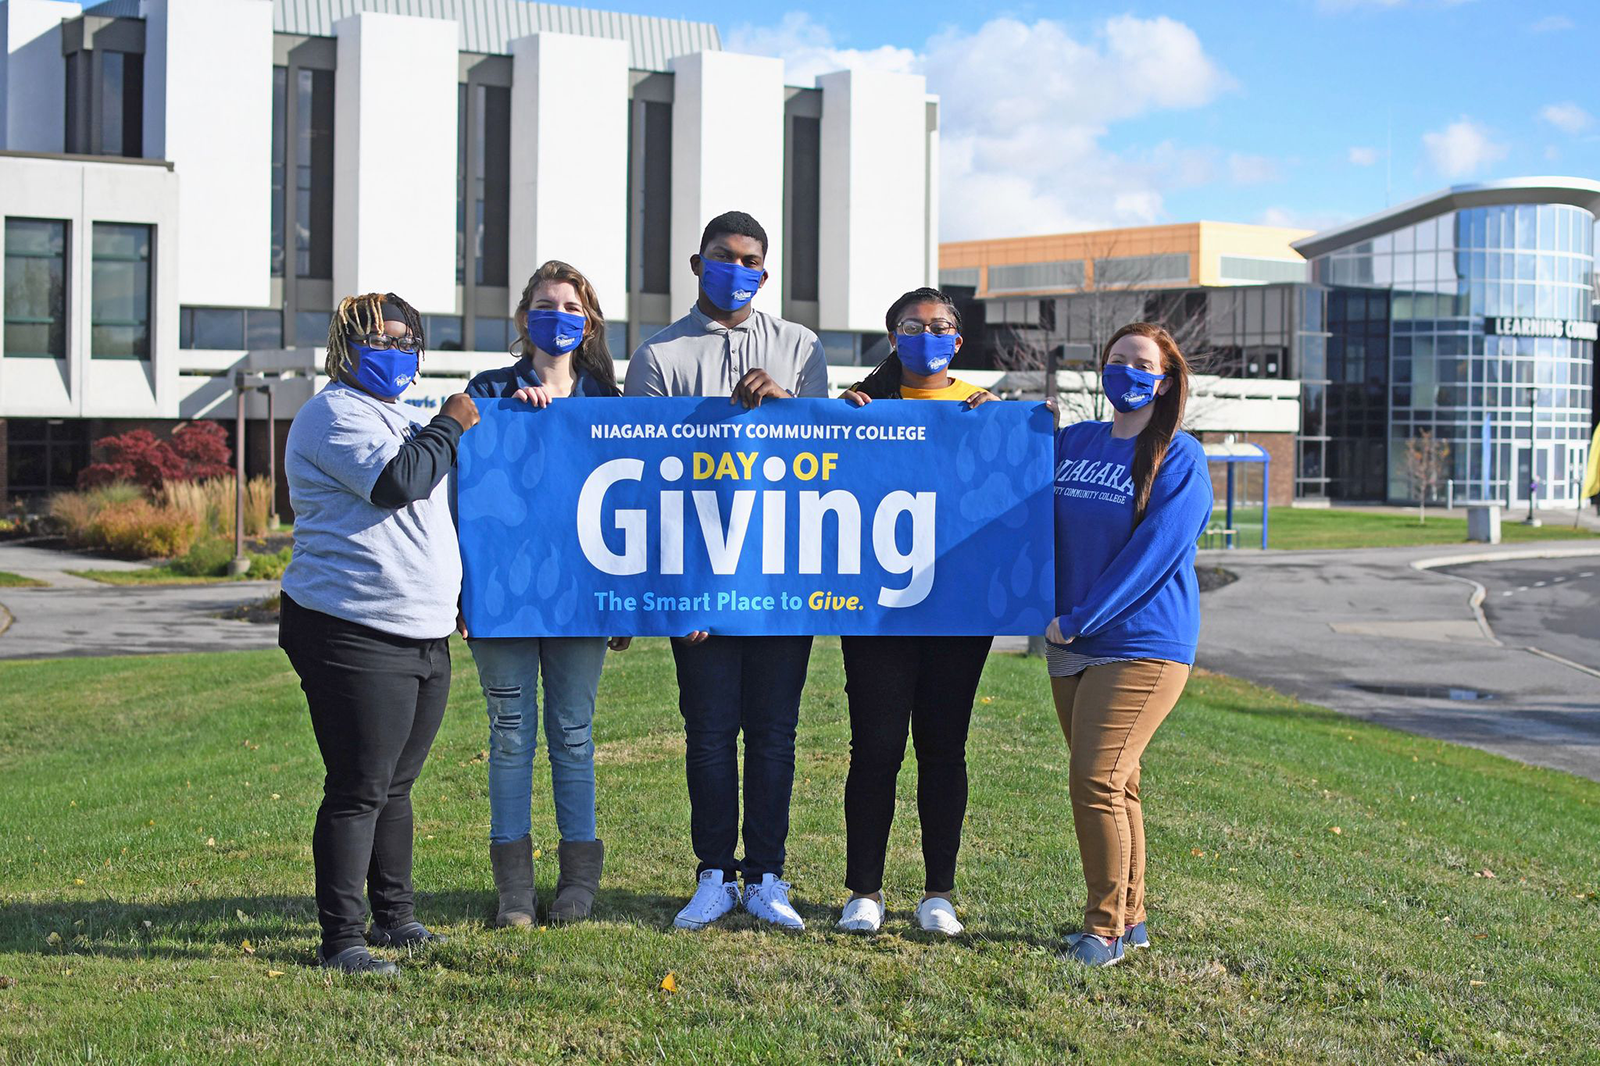 Niagara County Community College To Host Second Annual Day of Giving